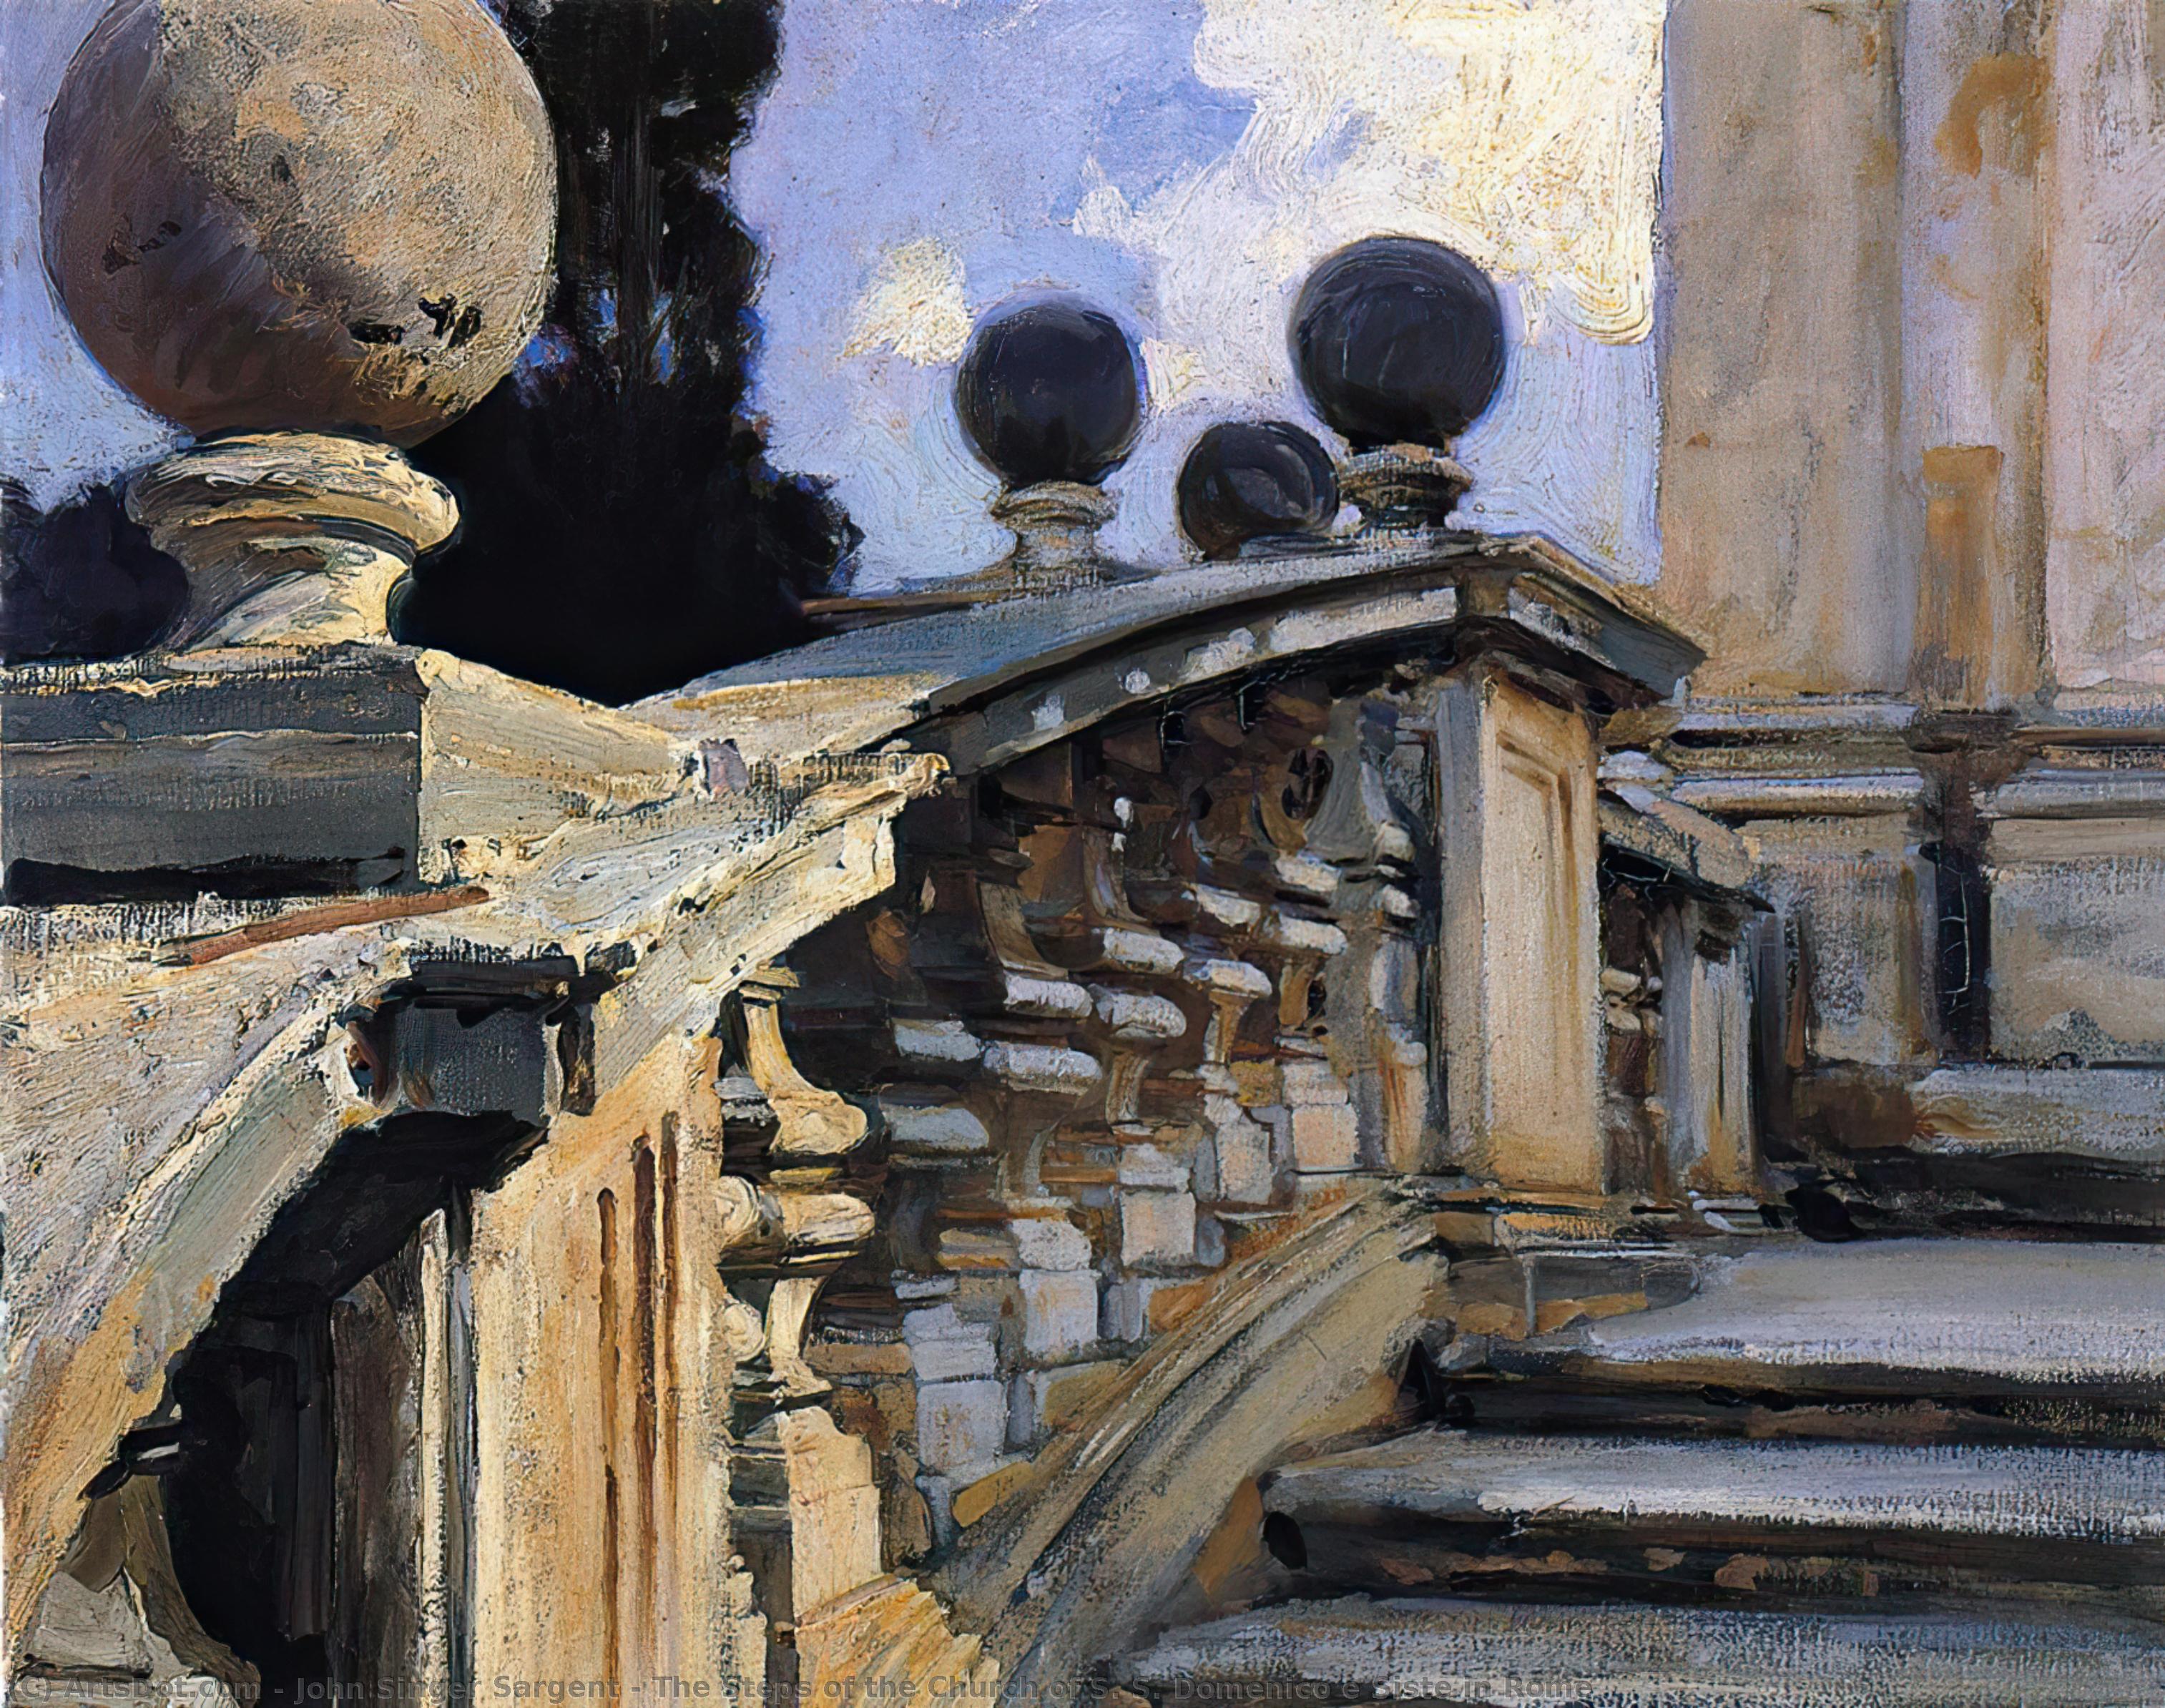 WikiOO.org - 백과 사전 - 회화, 삽화 John Singer Sargent - The Steps of the Church of S. S. Domenico e Siste in Rome